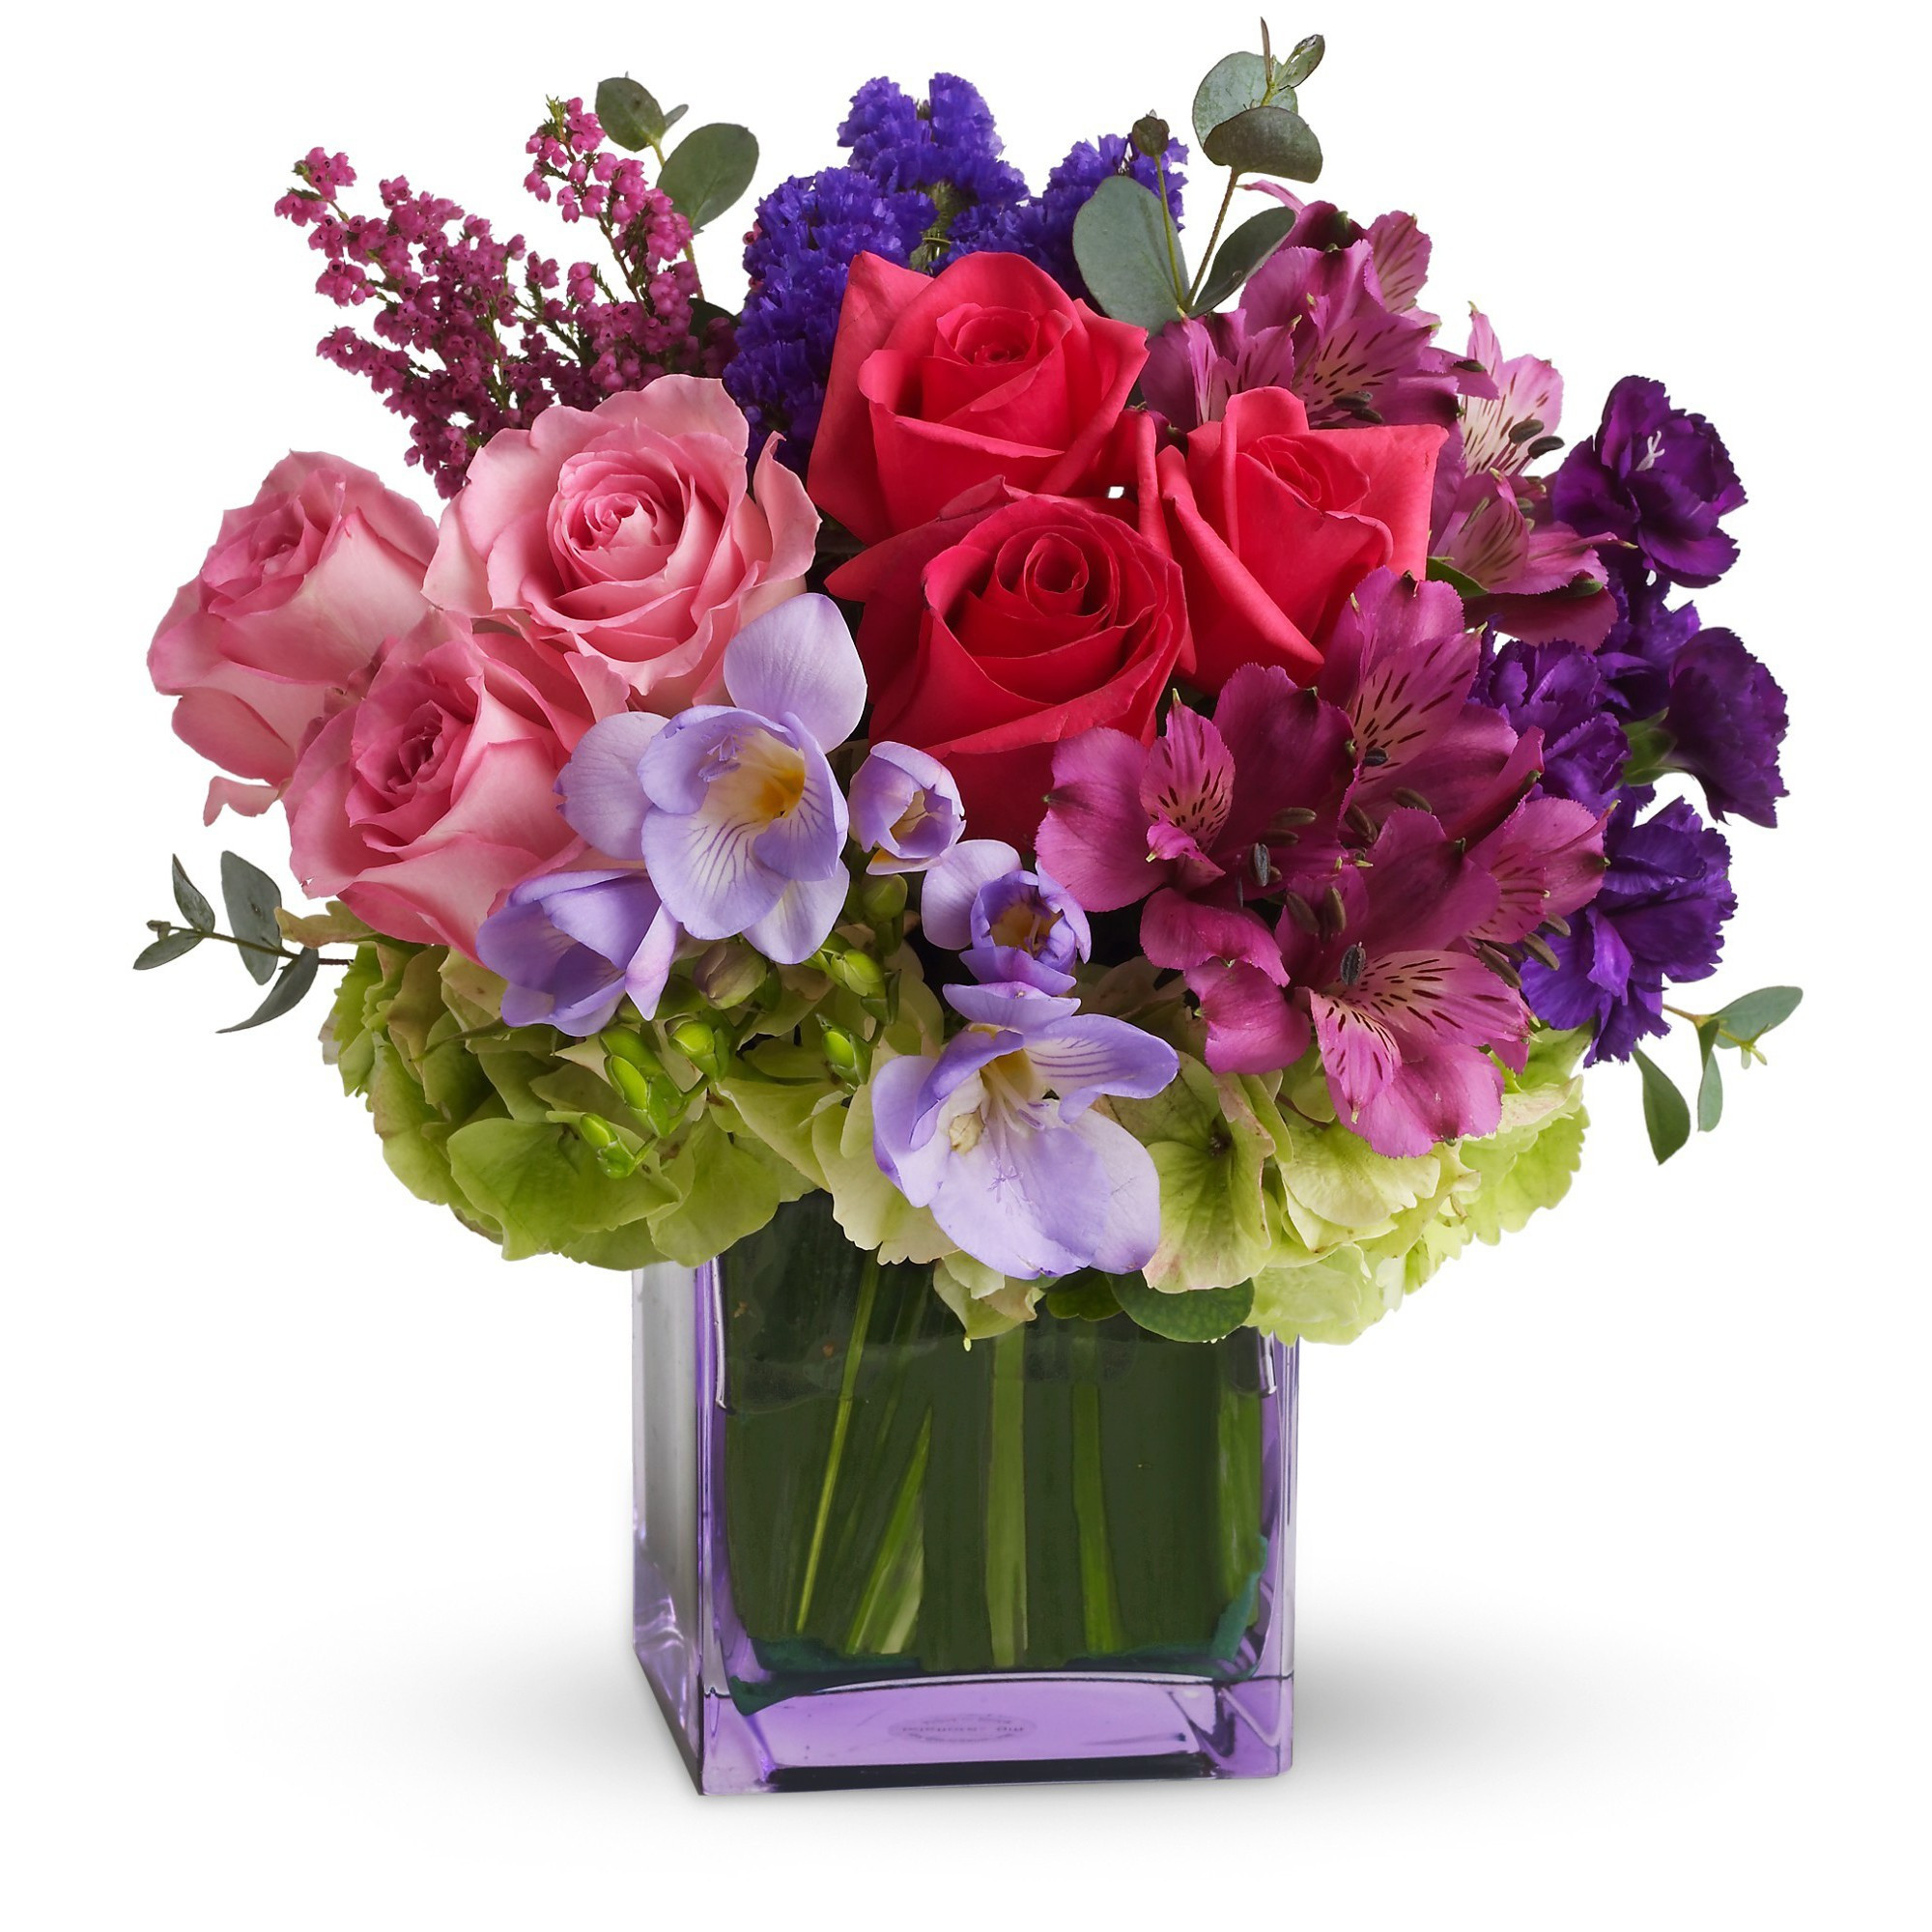 17 Ideal Ftd Cross Vase 2022 free download ftd cross vase of flowers delivery peoria prospect florist within exquisite beauty